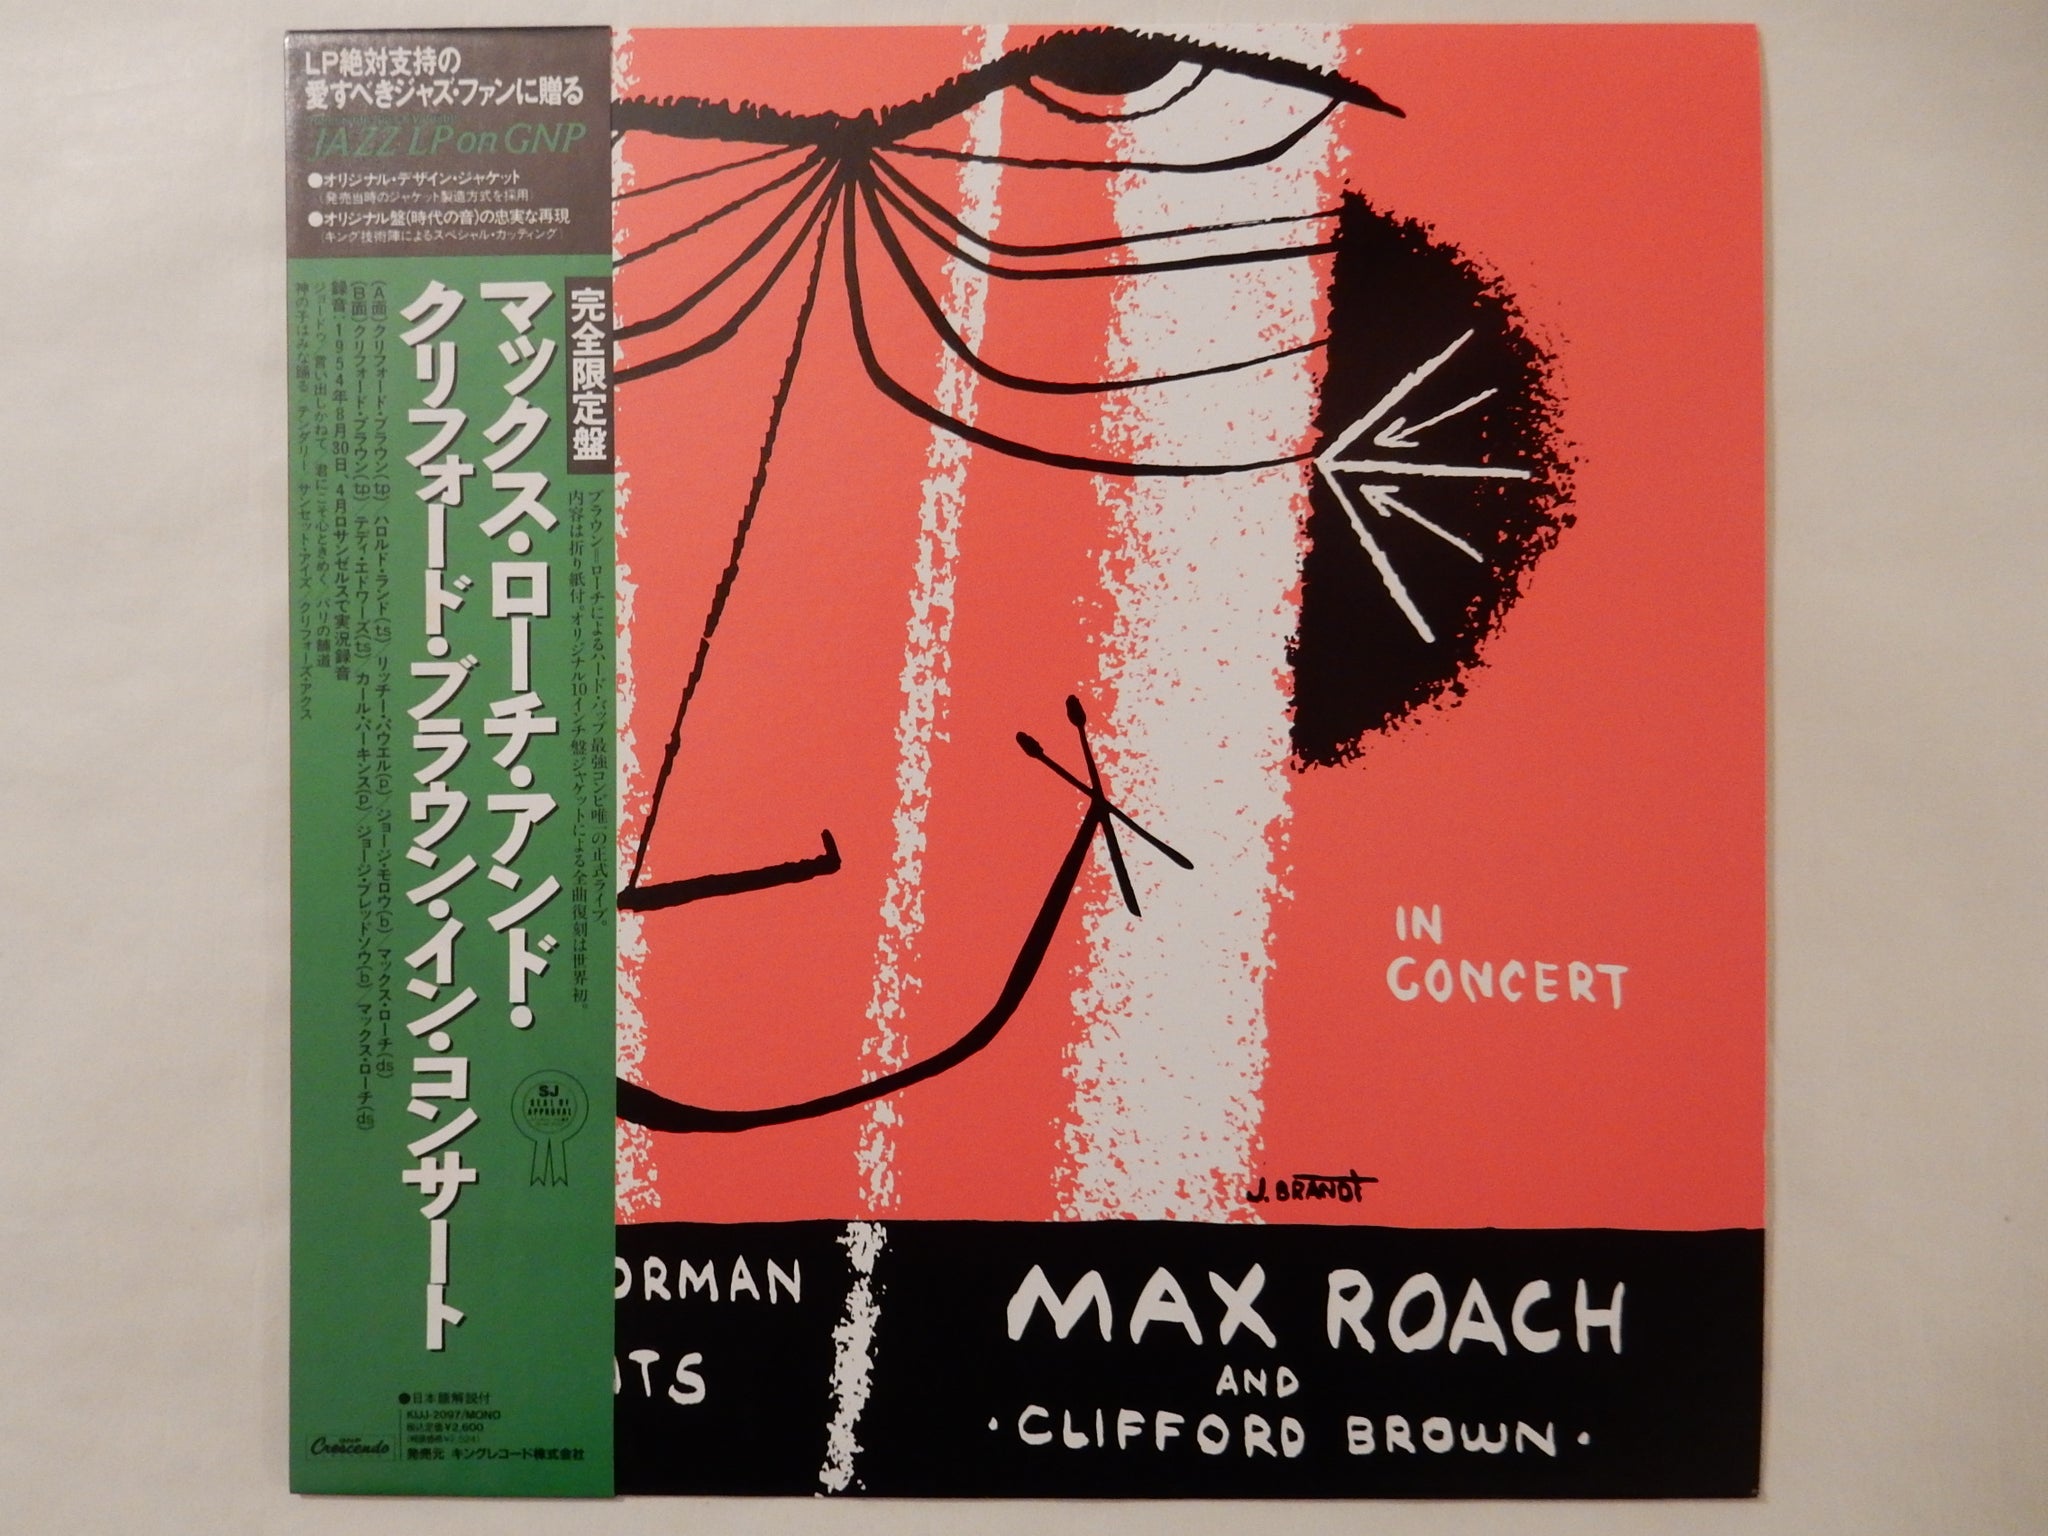 Max Roach, Clifford Brown - In Concert (LP-Vinyl Record/Used